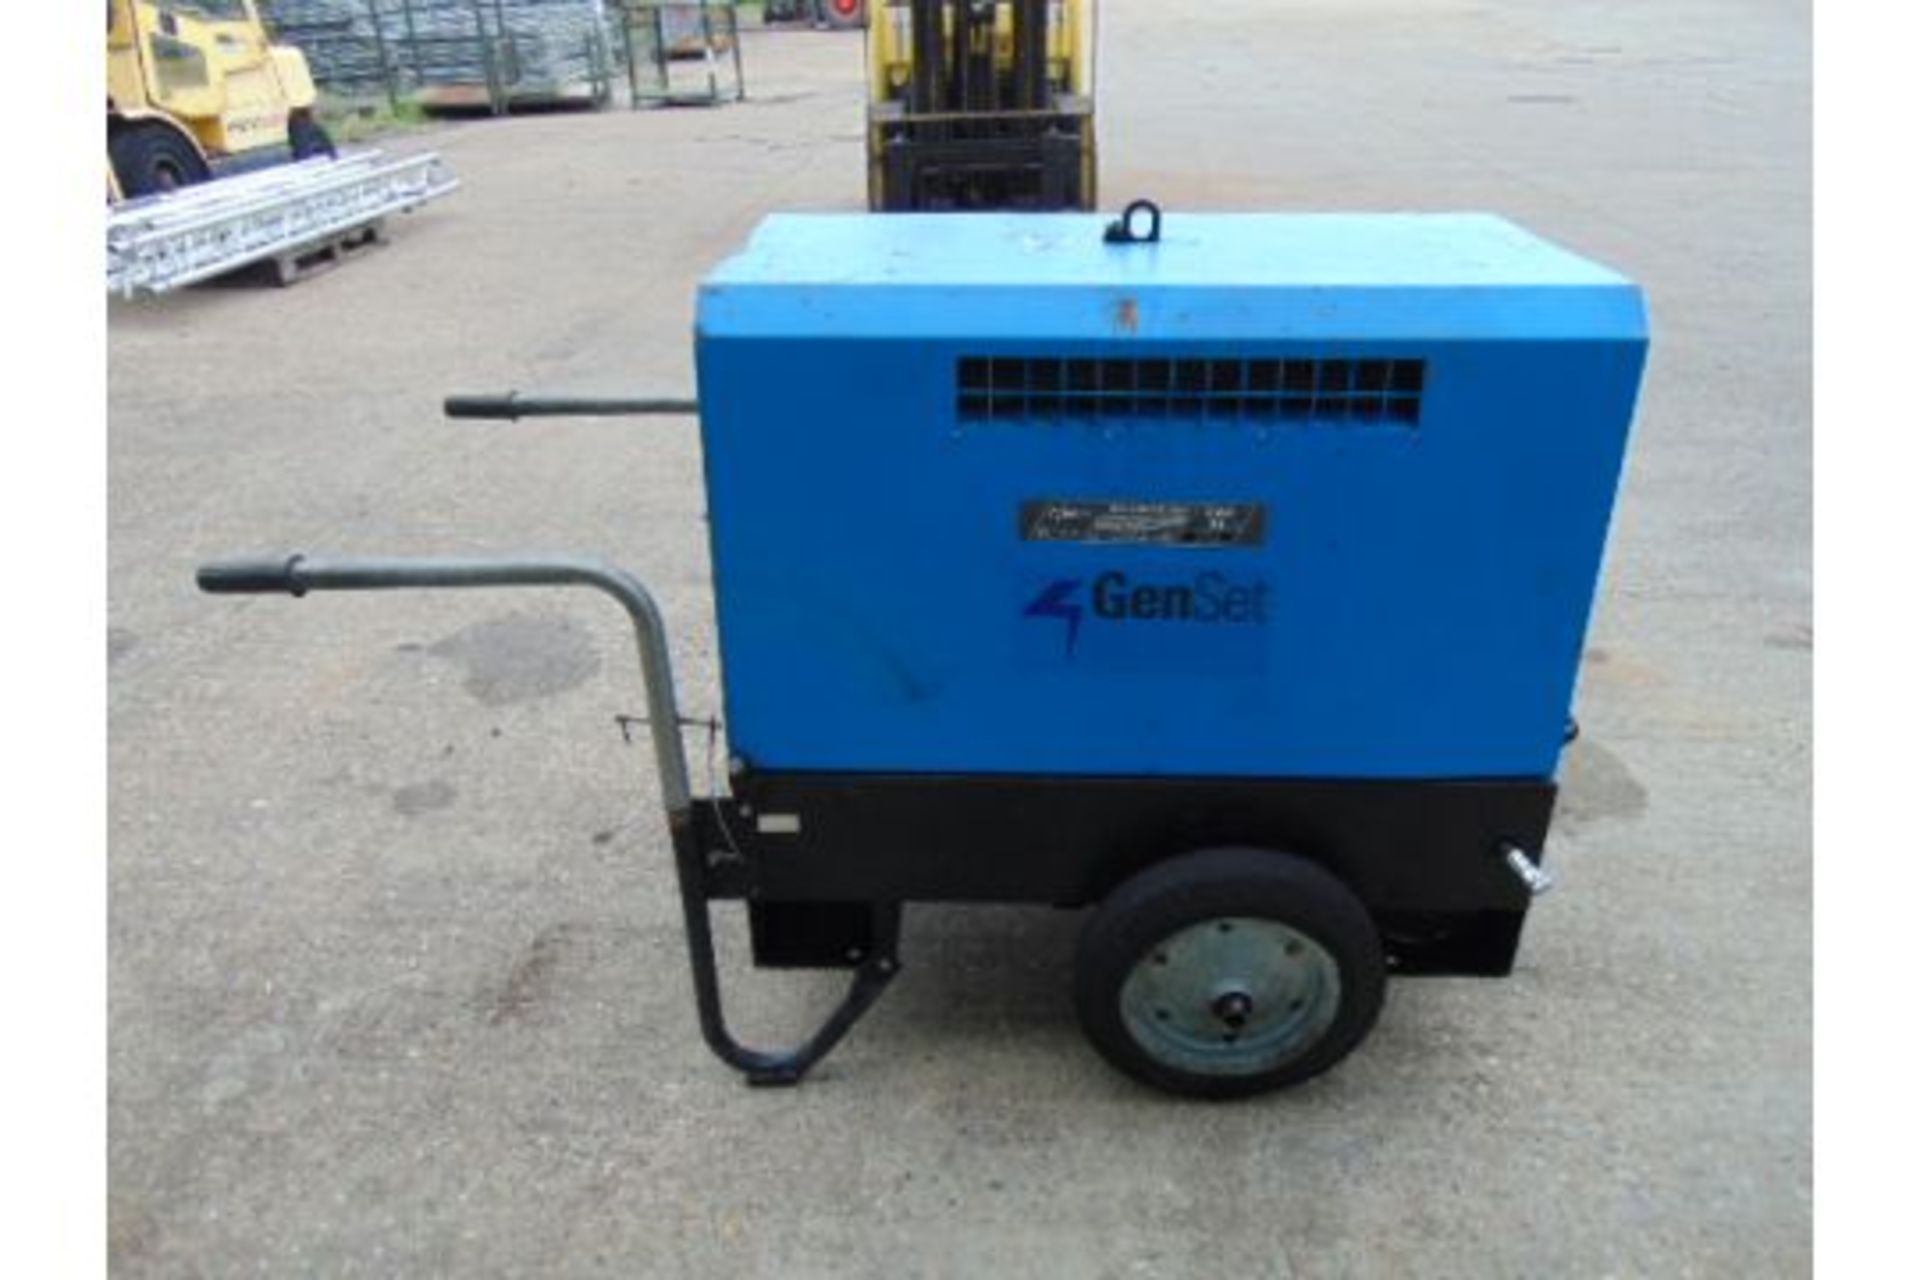 Genset MG 6000 E-SSY 6KVA Diesel Generator ONLY 3,877 HOURS - Image 2 of 11